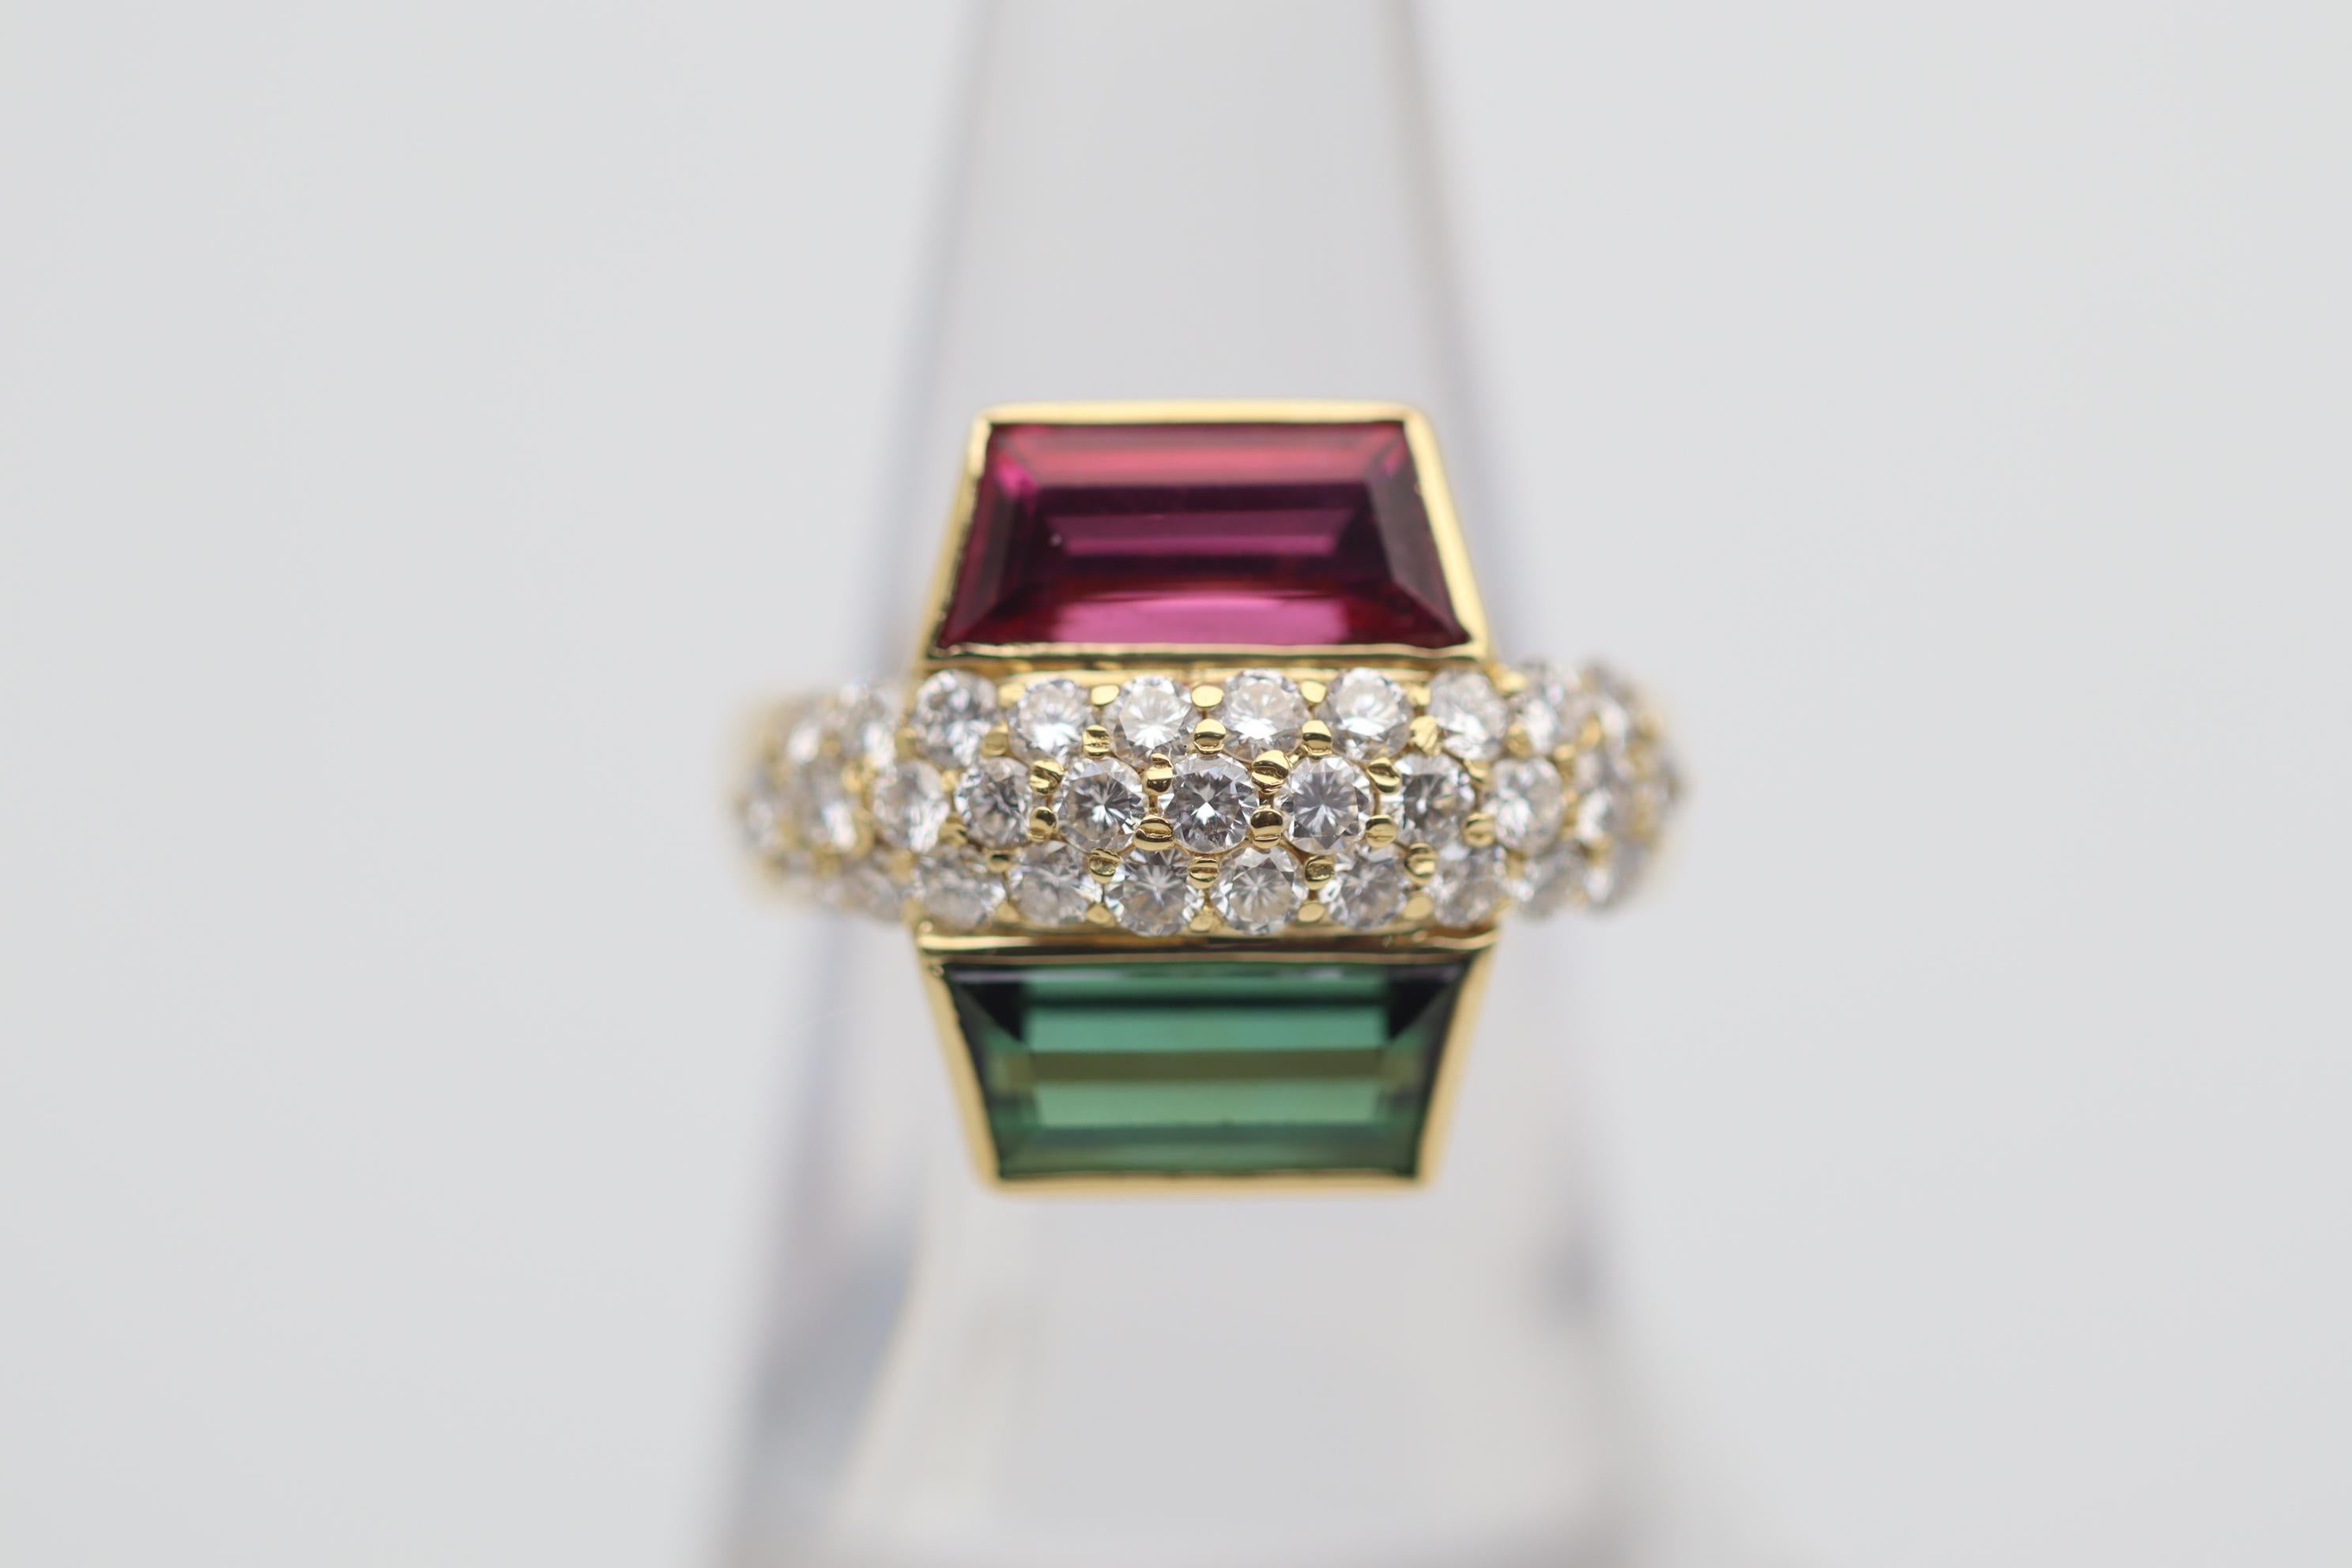 A stylish and chic ring features two gem tourmalines, one a vibrant red rubellite while the other a deep intense green. They weigh 1.75 and 1.51 carats respectively, and are matching in size, shape, and color intensity. Between the two tourmalines